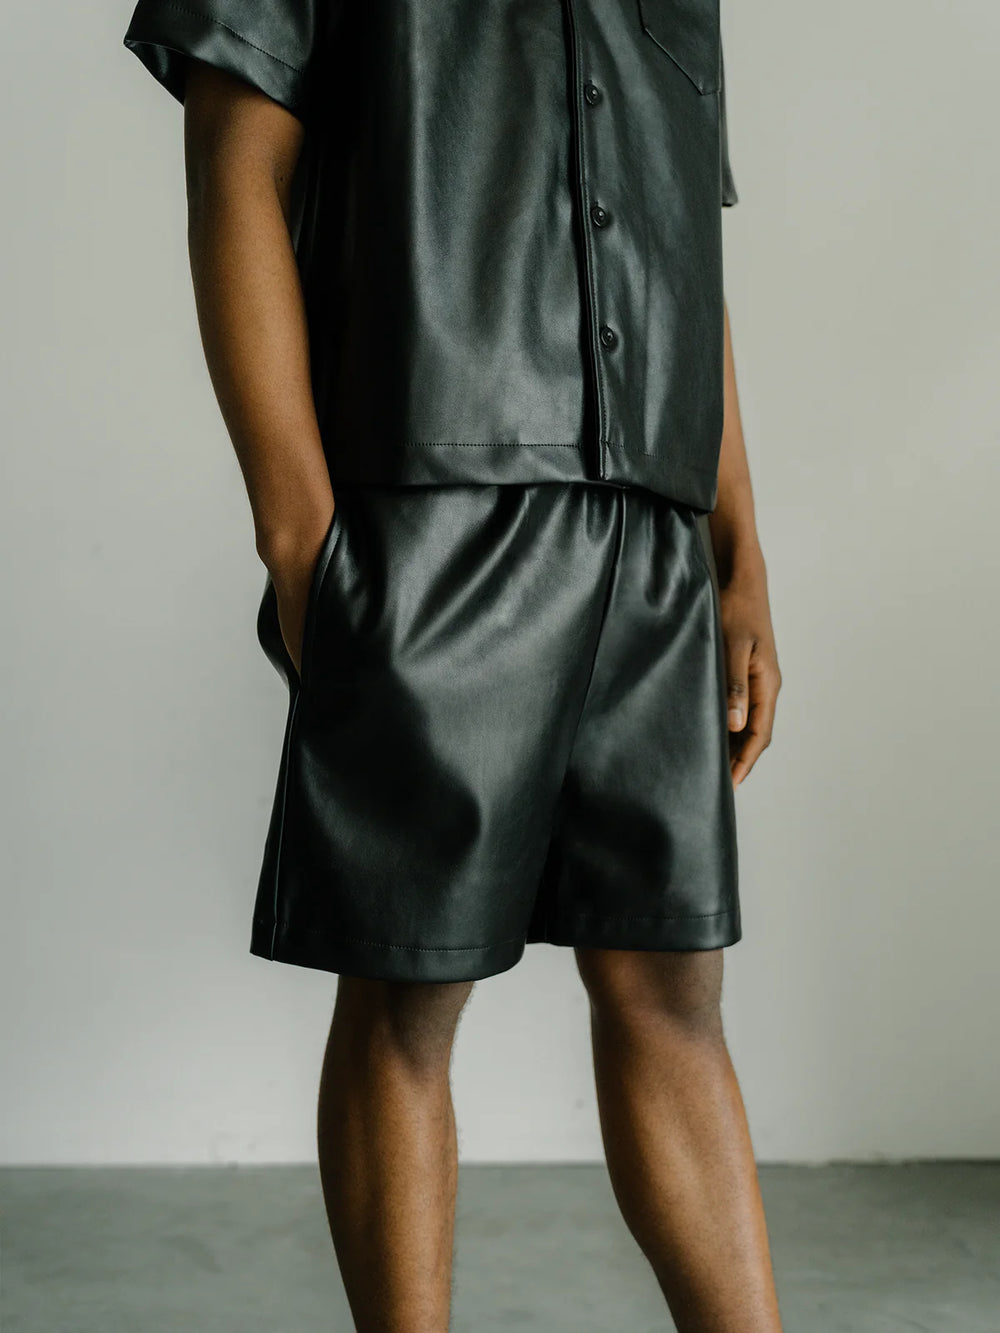 LORD CULTURE LEATHER SHORTS